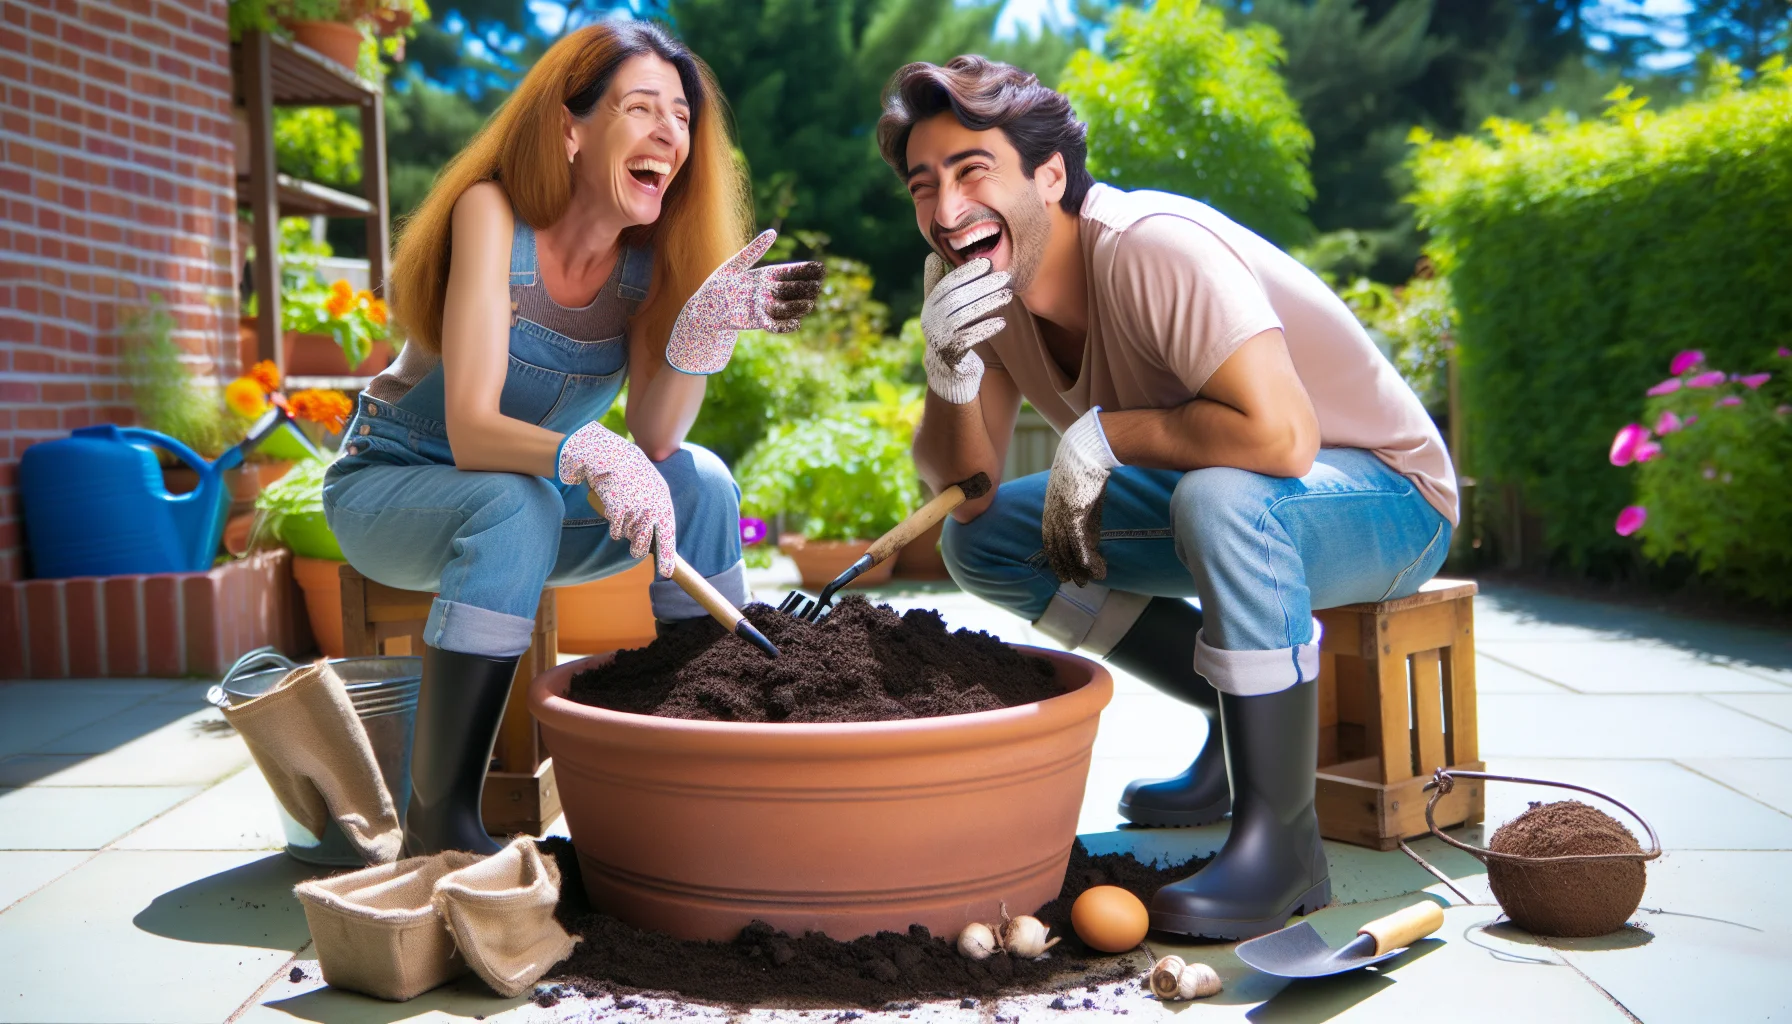 Create a humourous, realistic image centered on the theme of preparing garden soil. Show two individuals, a Middle Eastern woman in her 40s and a Hispanic man in his 30s, in a sunny outdoor setting. They are both dressed casually, wearing gardening gloves and boots, engaged in turning compost and soil inside a large pot. The woman has a playful expression as if just having told a joke and the man is laughing heartily, knee-deep in the pot. At their feet, a variety of garden tools are scattered. Use this scene to demonstrate the fun side of gardening.